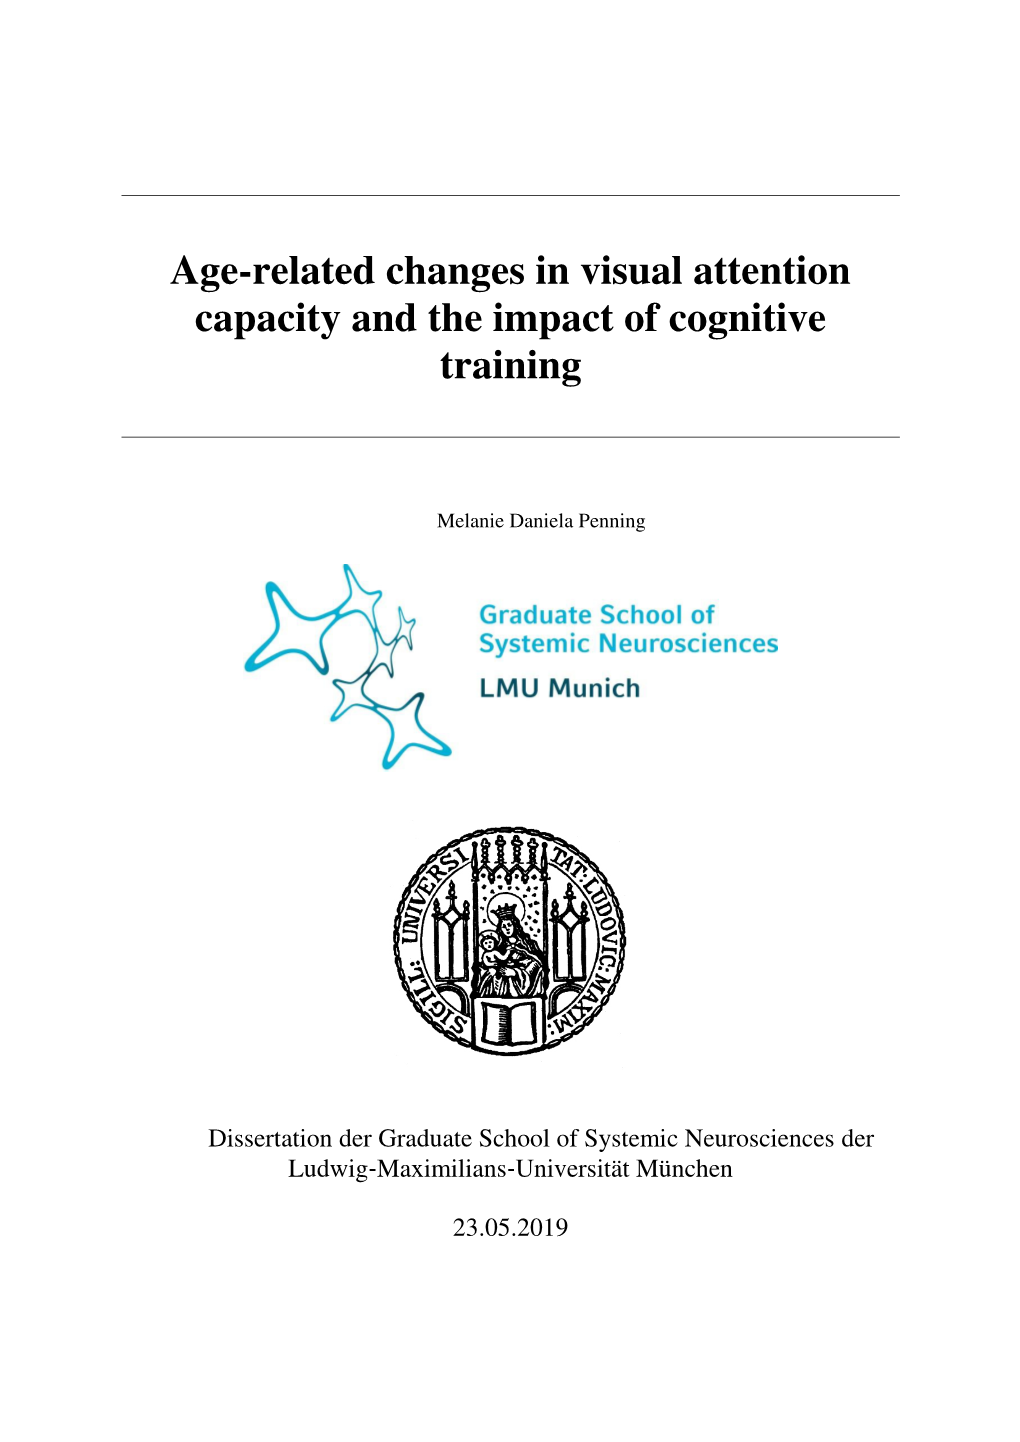 Age-Related Changes in Visual Attention Capacity and the Impact of Cognitive Training